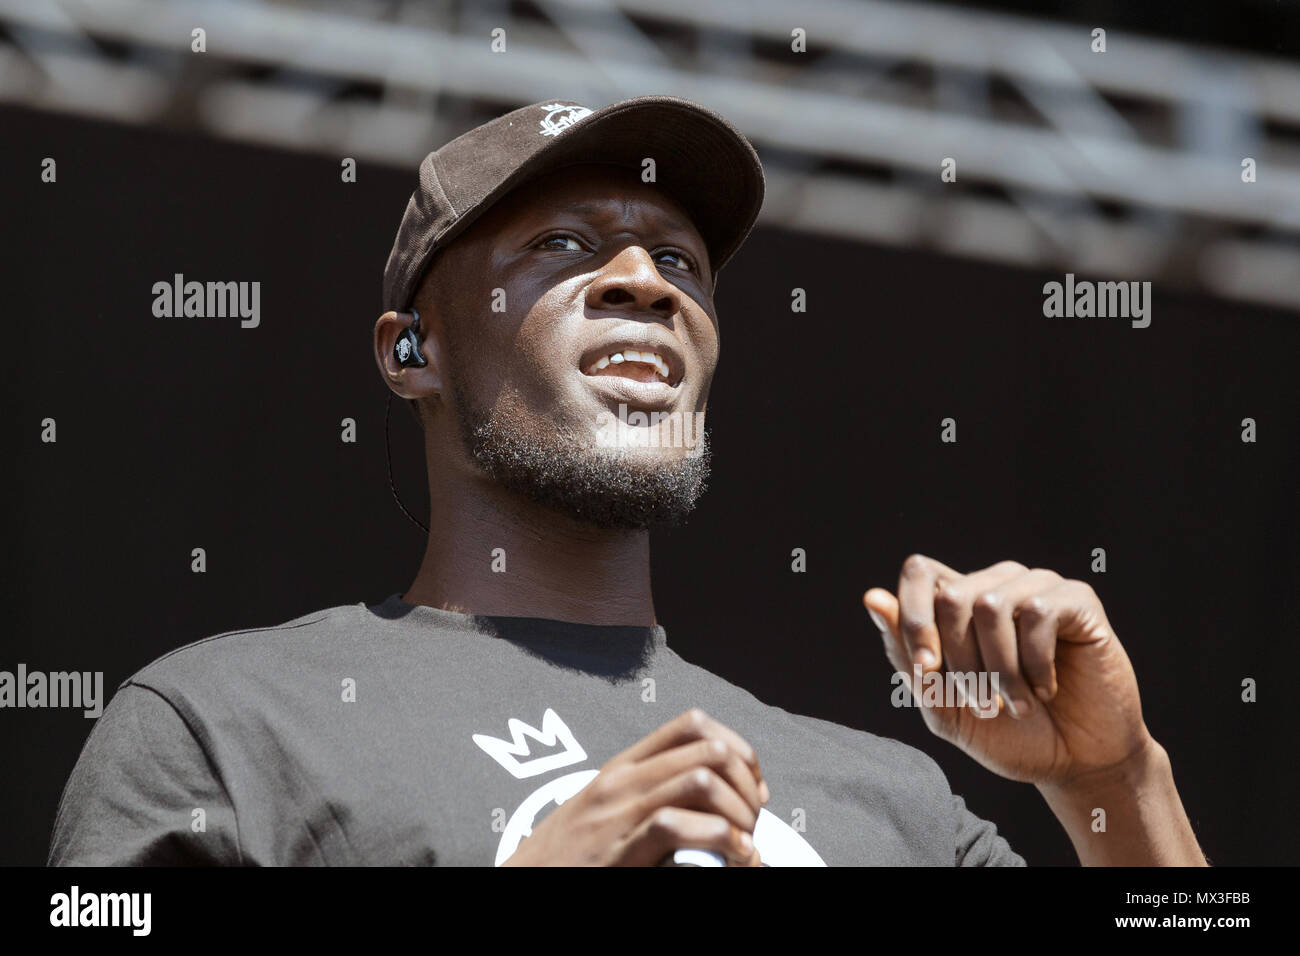 Stormzy performing live onstage. Stormzy live, Stormzy rapper, Stormzy singer, Stormzy in concert. Stock Photo